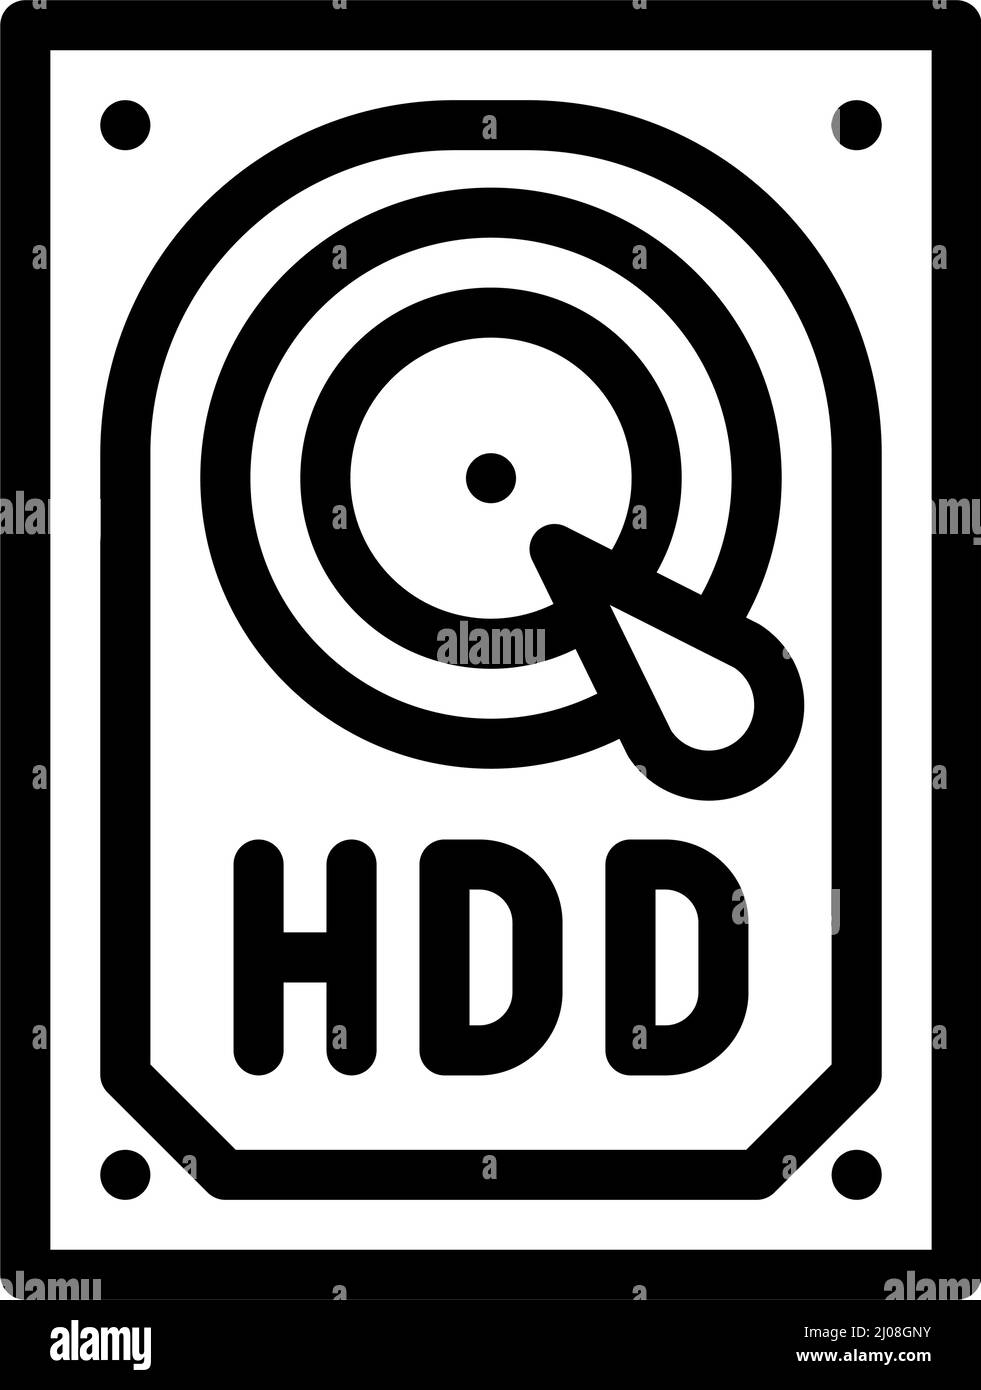 hdd computer part line icon vector illustration Stock Vector